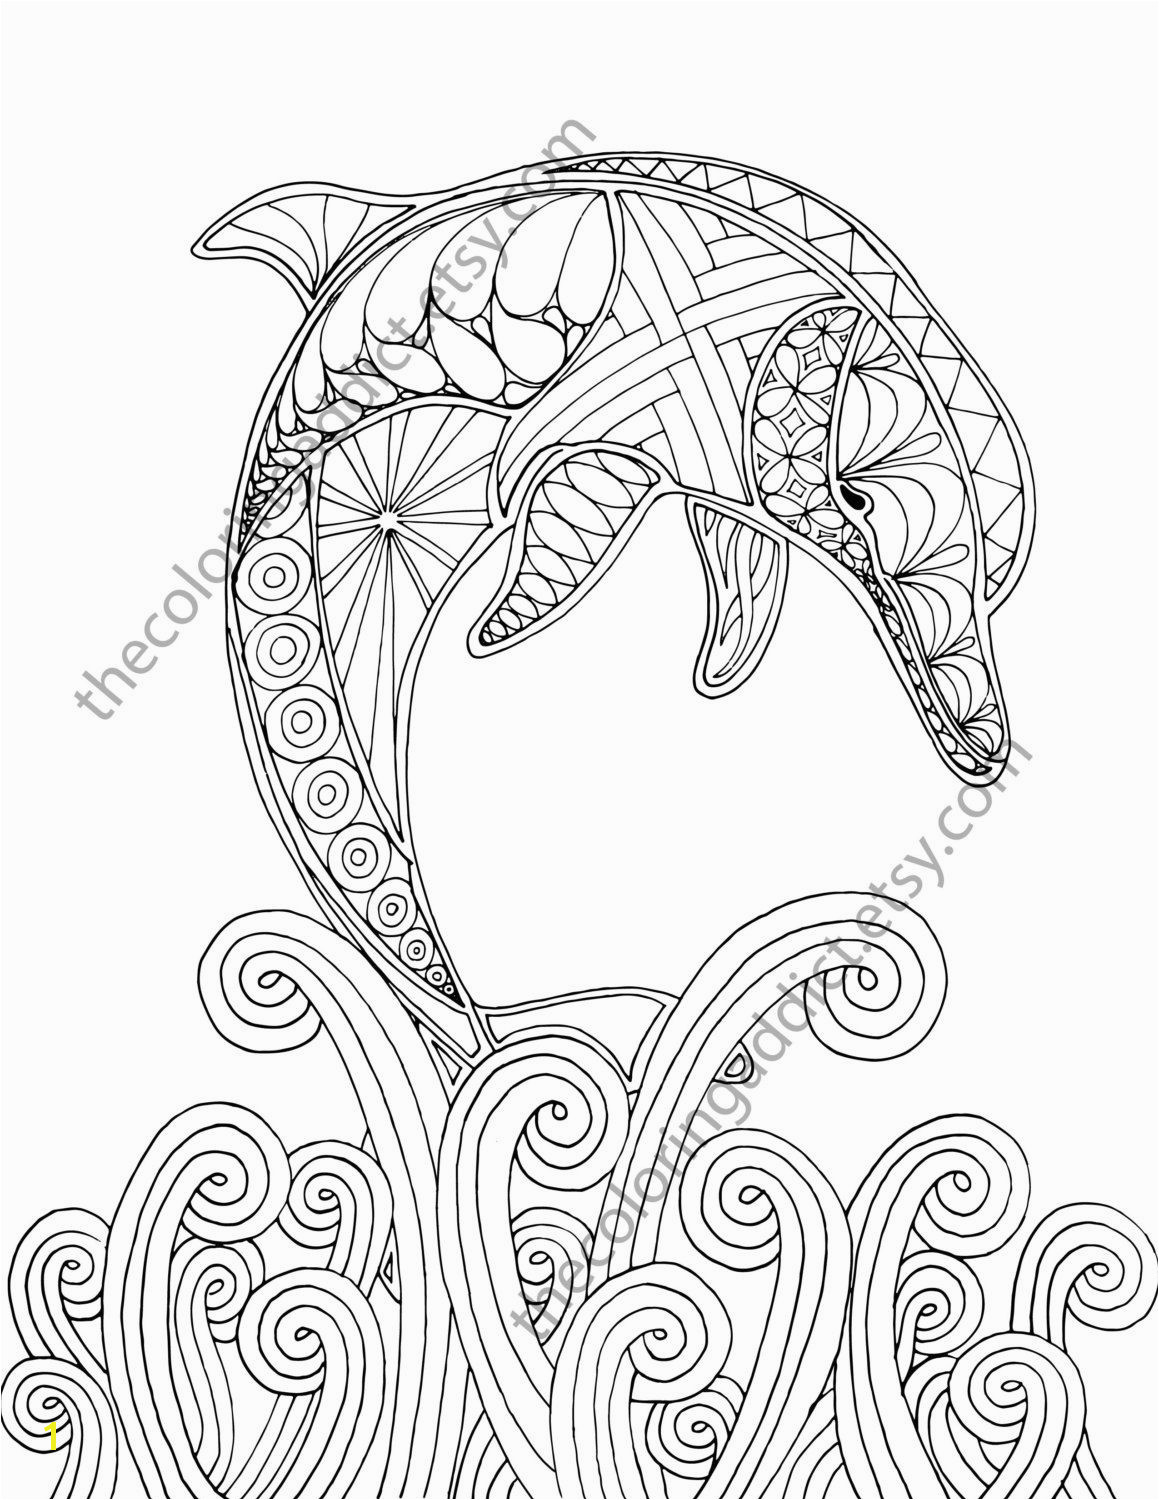 Adult Coloring Pages Nautical Dolphin Coloring Page Adult Coloring Sheet Nautical Coloring